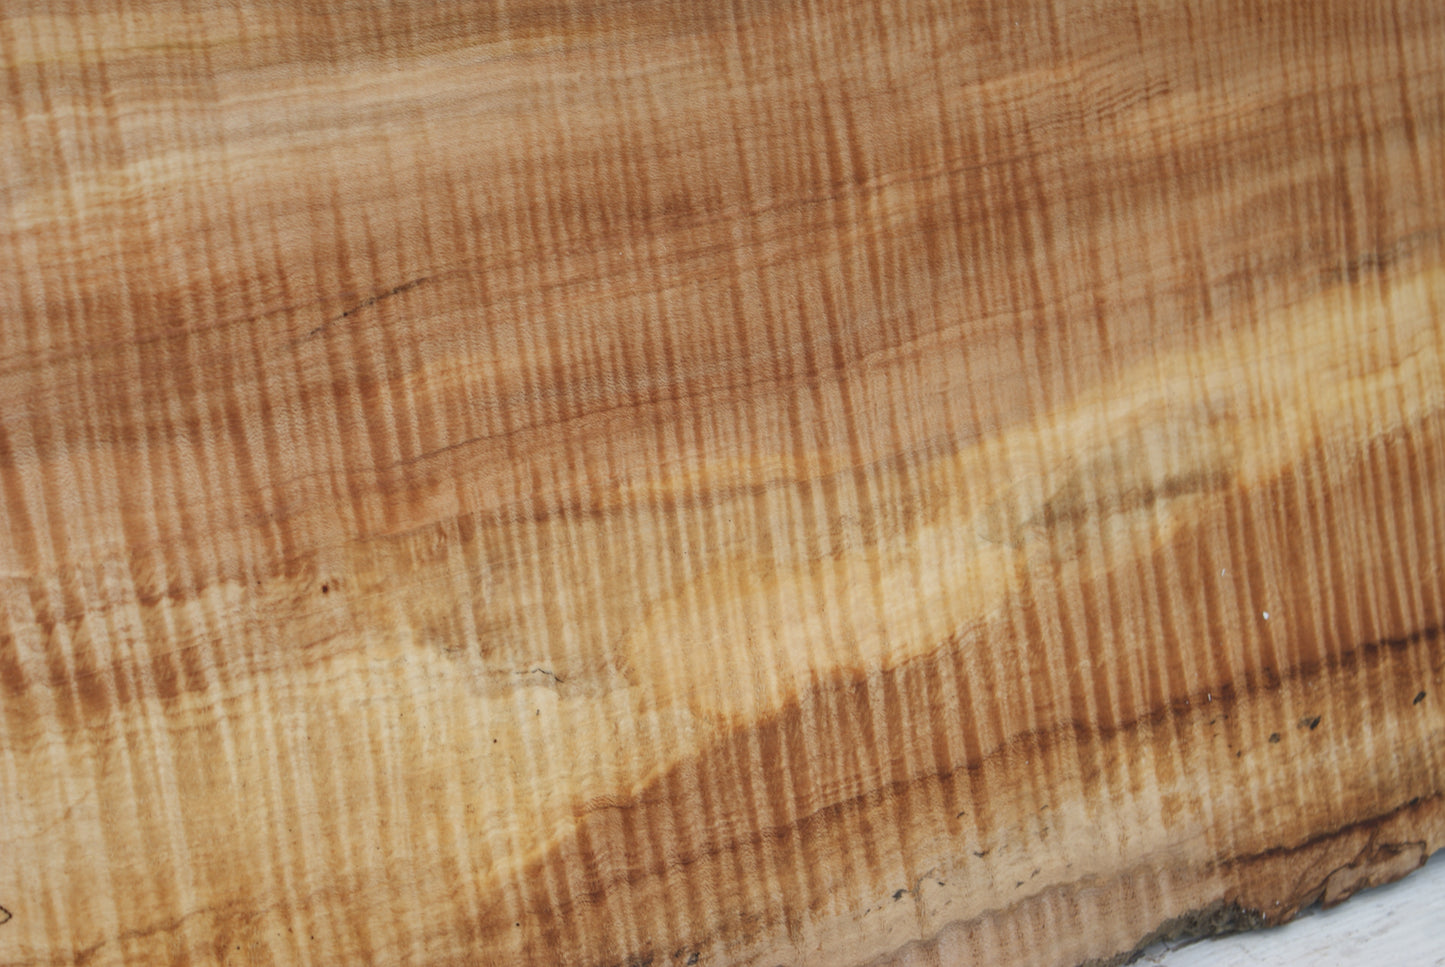 Spalted Rippled Sycamore 1271 L x 496 - 440  W x 48 D (mm) (459)